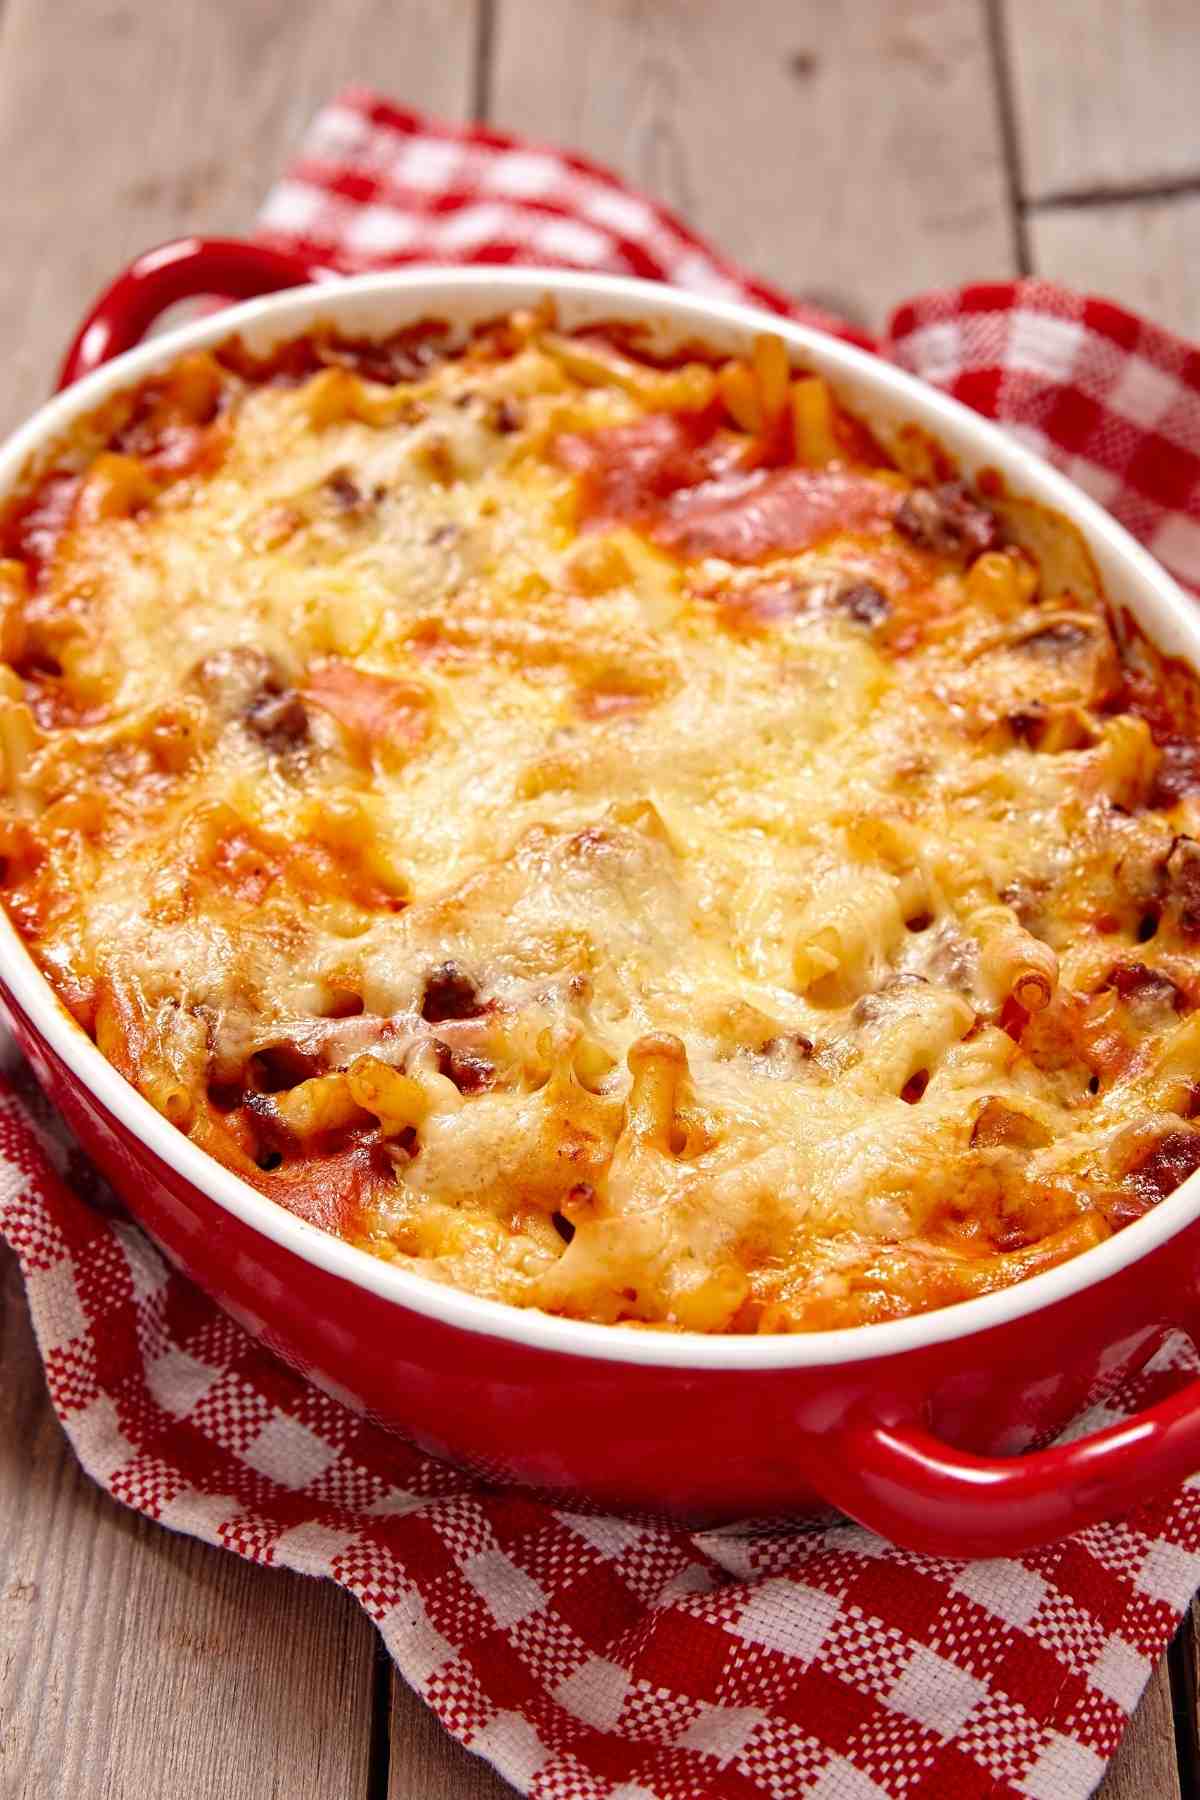 Make this hearty baked mostaccioli dish the next time you’re craving pasta. It’s a delicious combination of tender pasta, seasoned ground beef, marinara sauce, diced tomatoes, heavy cream, and two kinds of cheese.